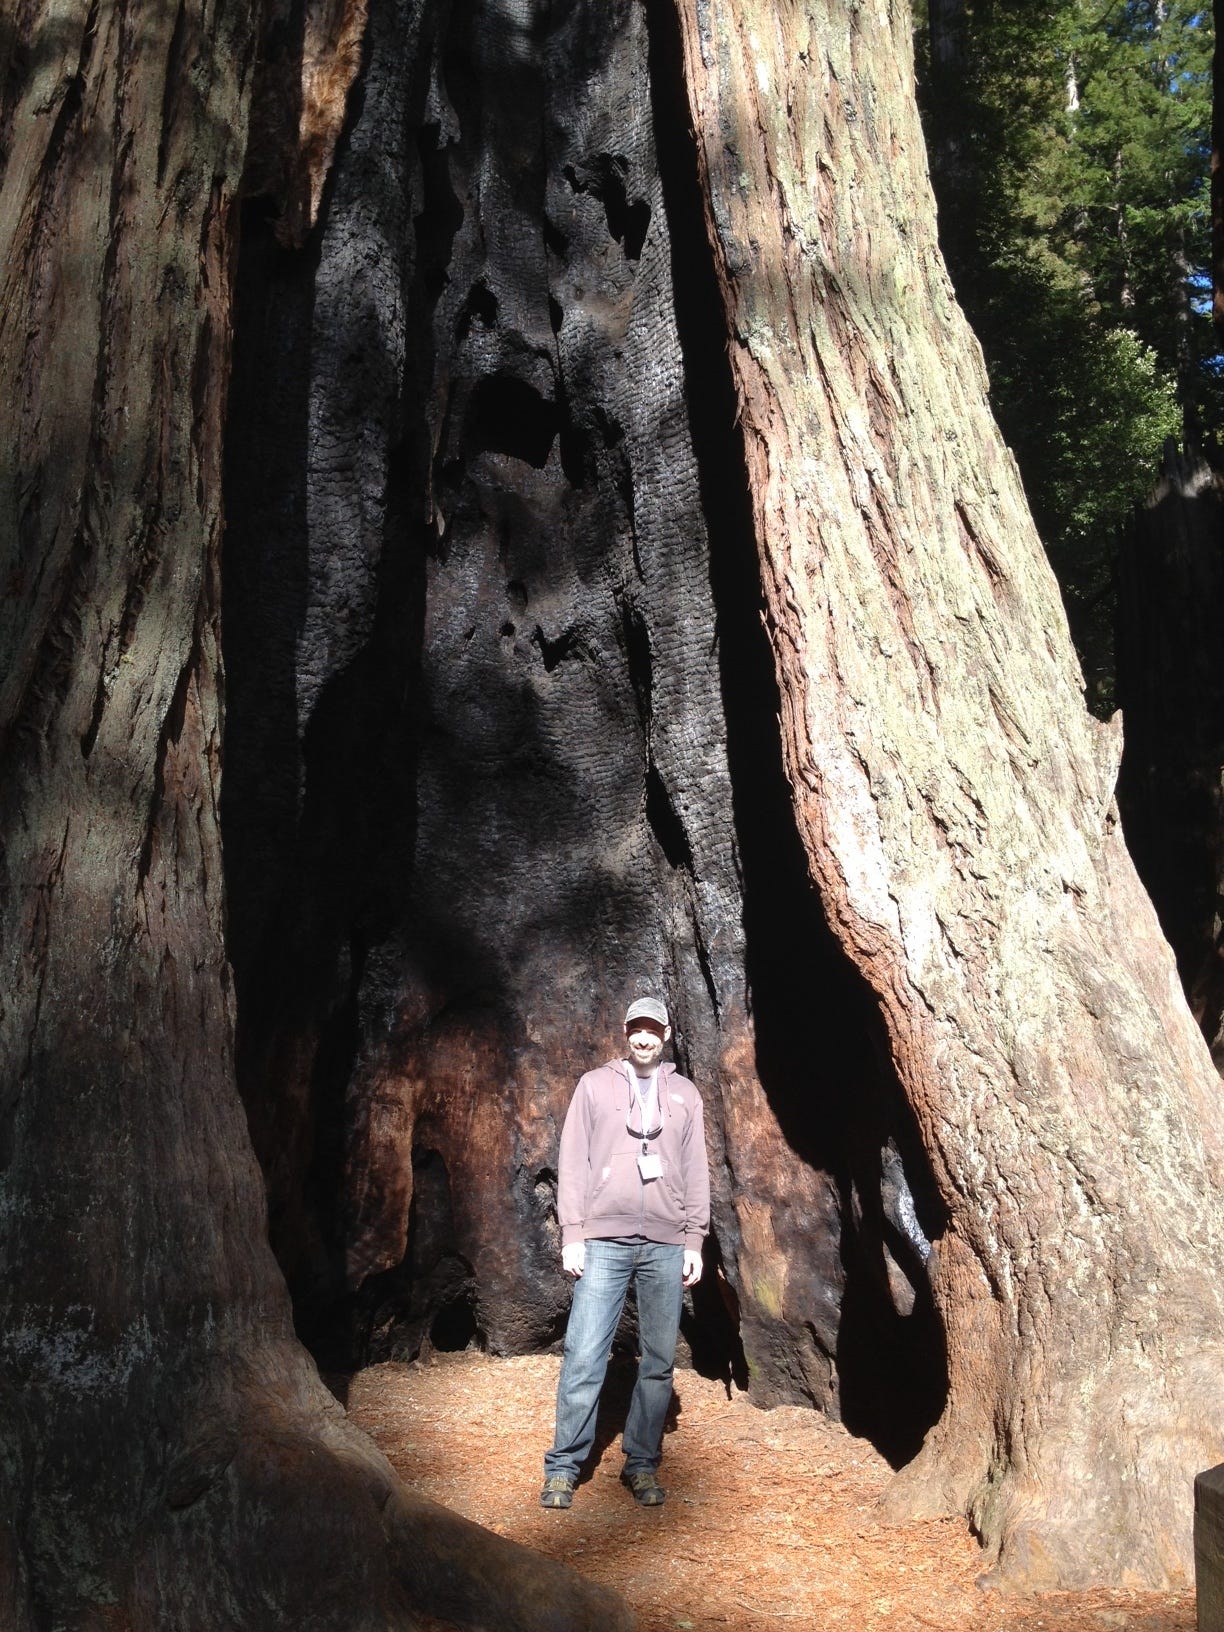 Me standing inside a burned-out redwood trunk.